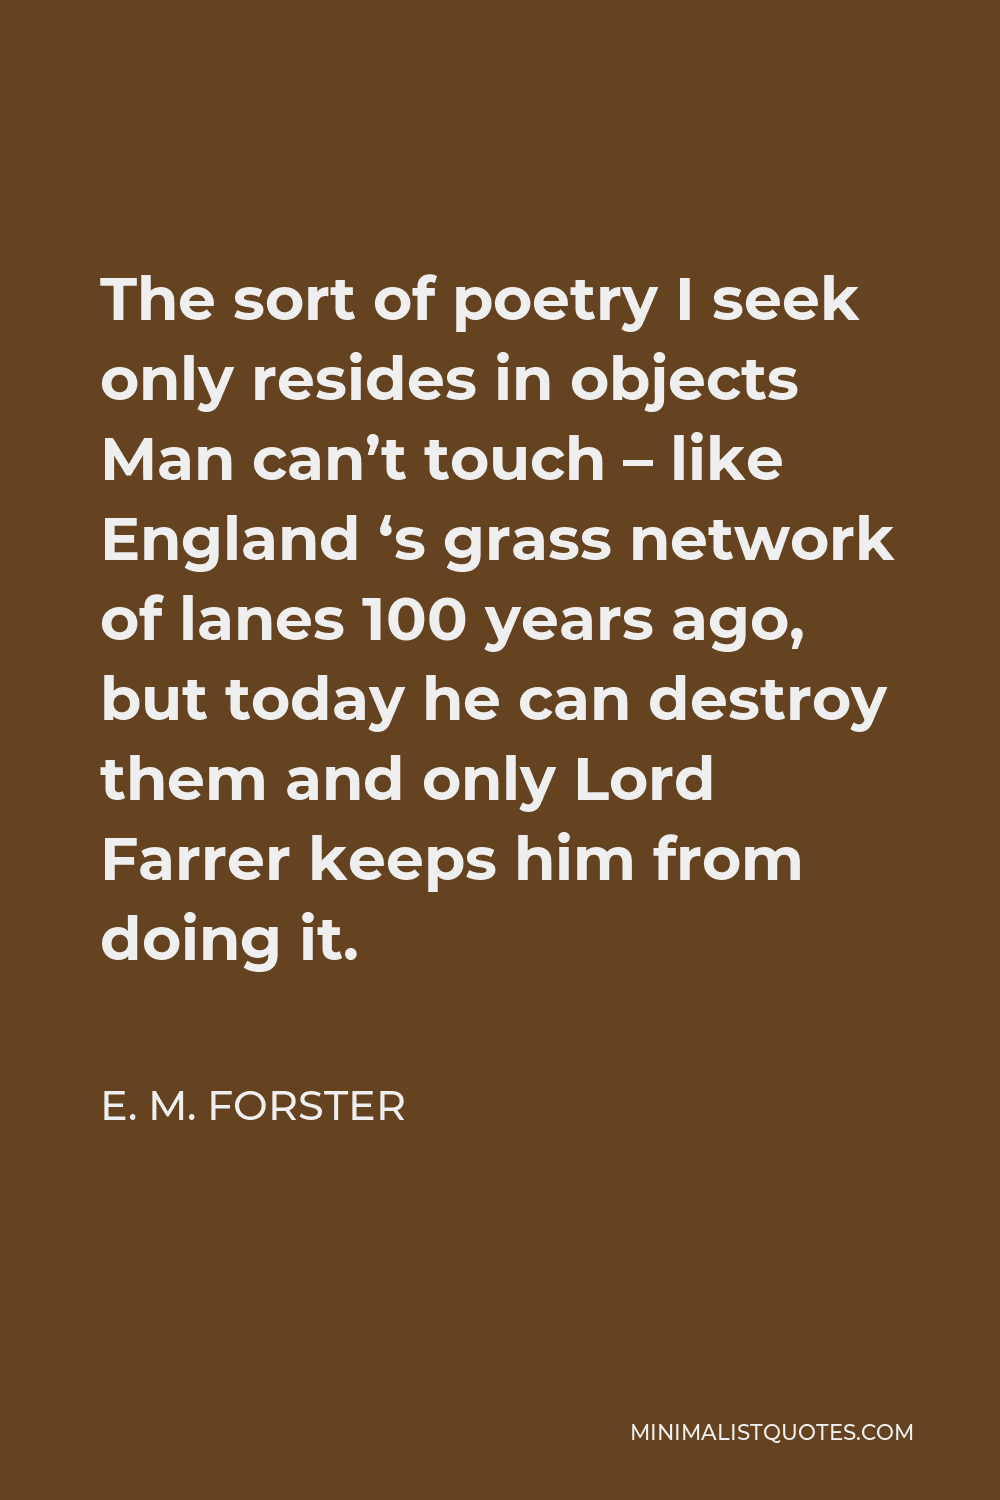 E. M. Forster Quote - The sort of poetry I seek only resides in objects Man can’t touch – like England ‘s grass network of lanes 100 years ago, but today he can destroy them and only Lord Farrer keeps him from doing it.